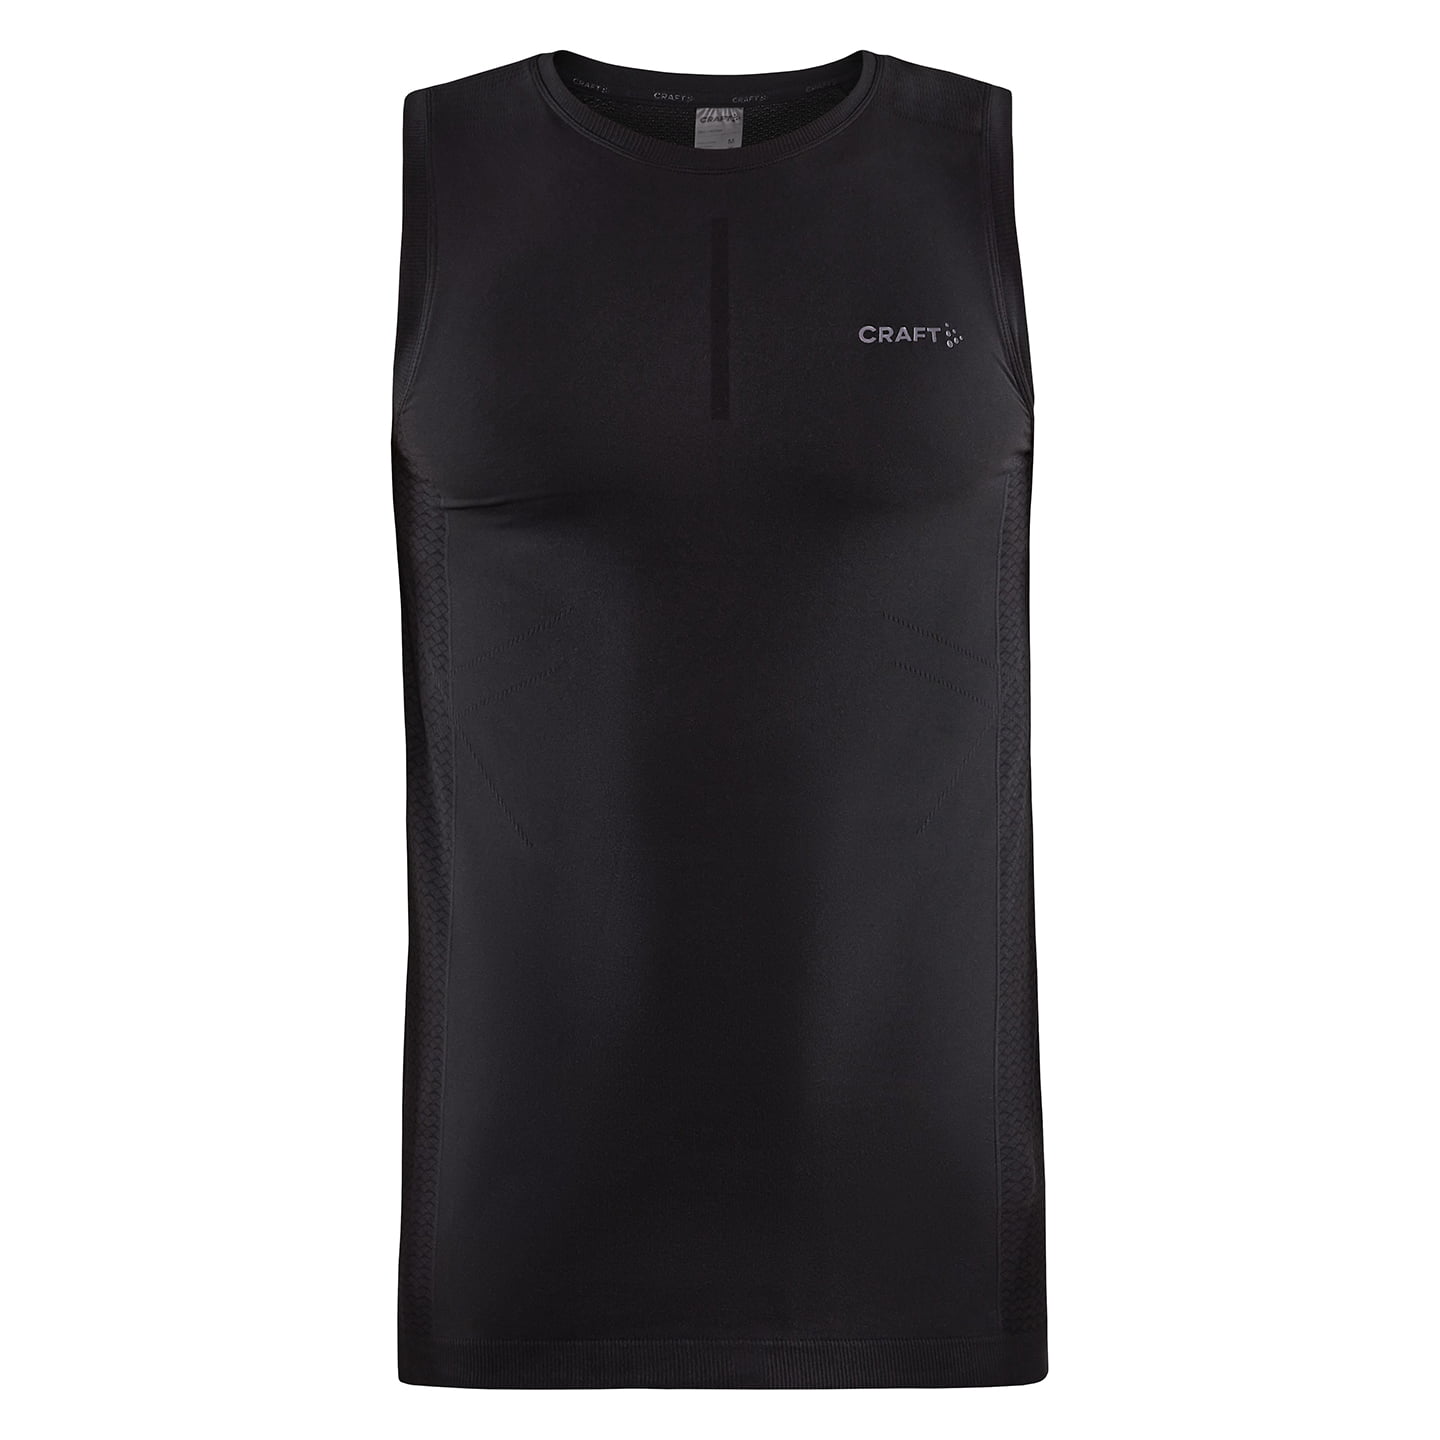 CRAFT Intensity Sleeveless Cycling Base Layer Base Layer, for men, size 2XL